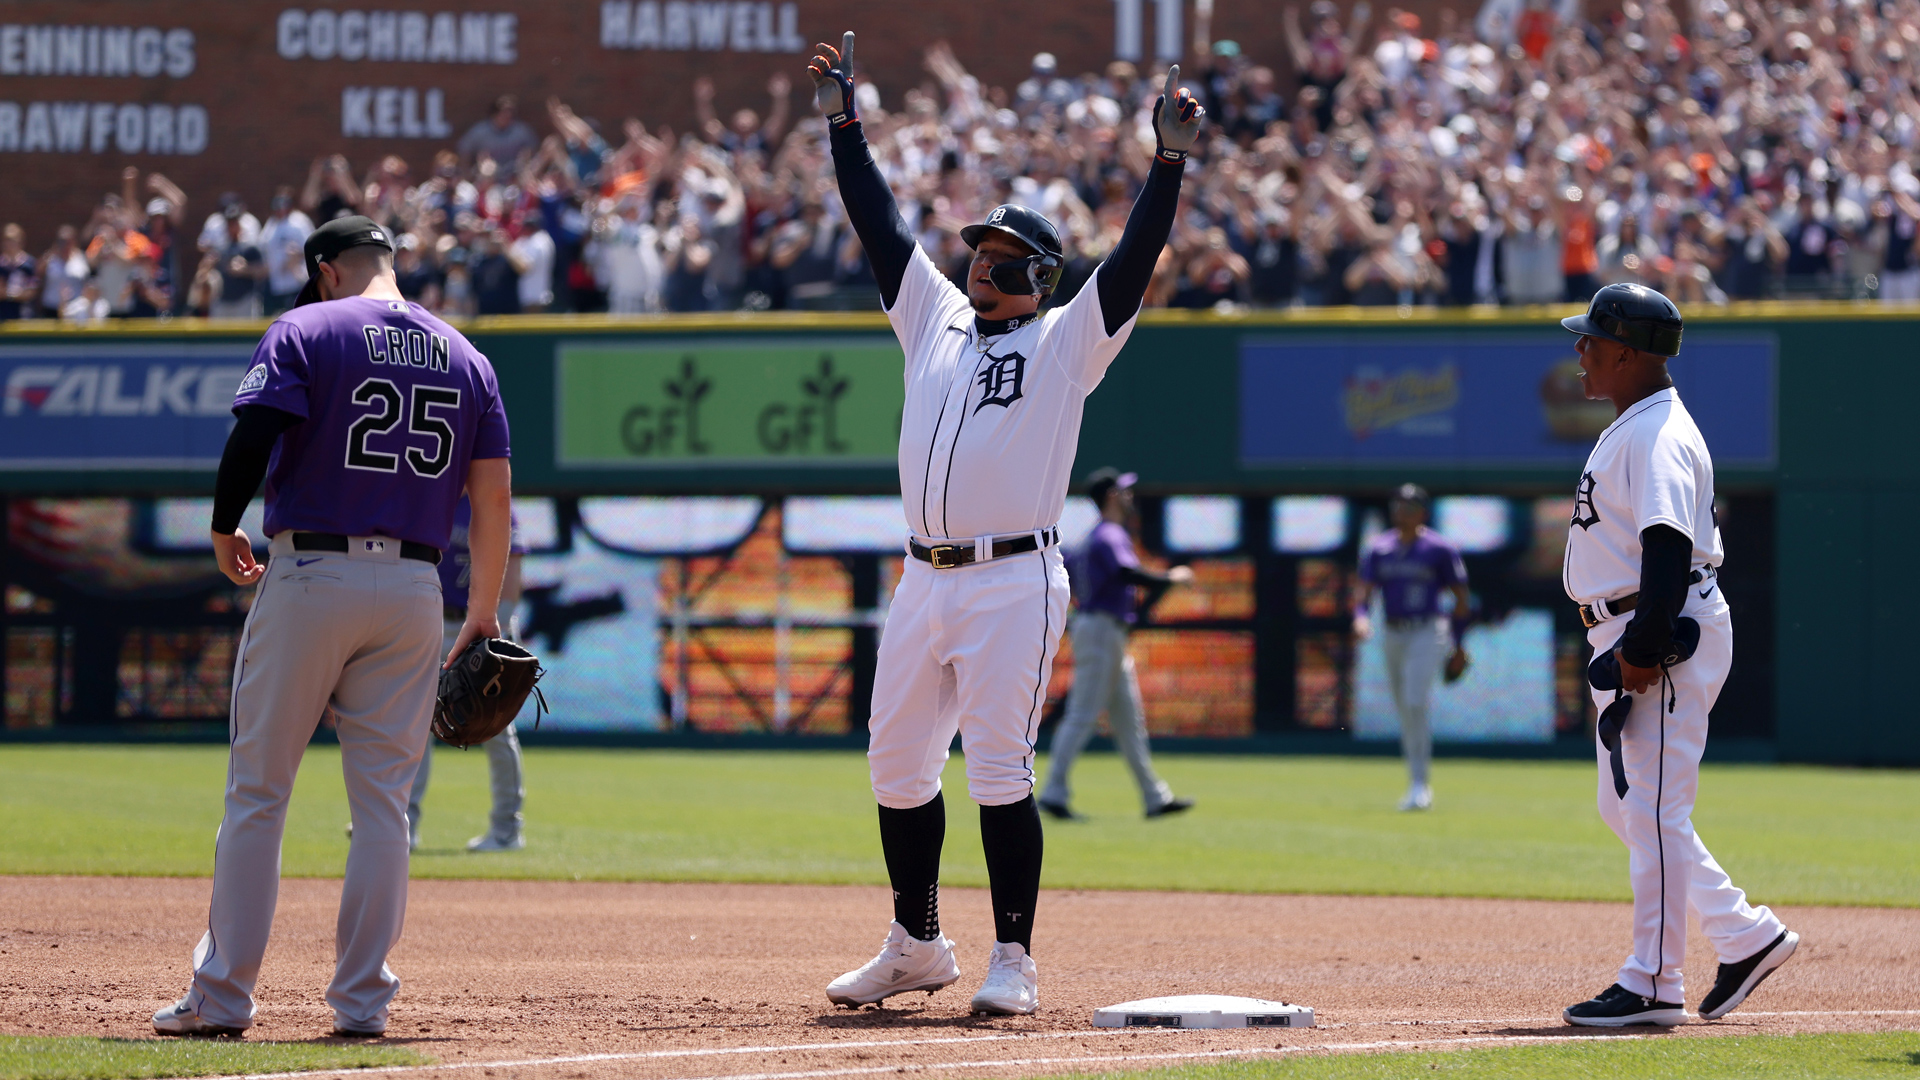 3,000 HITS! Miguel Cabrera joins the 3,000-hit club! 